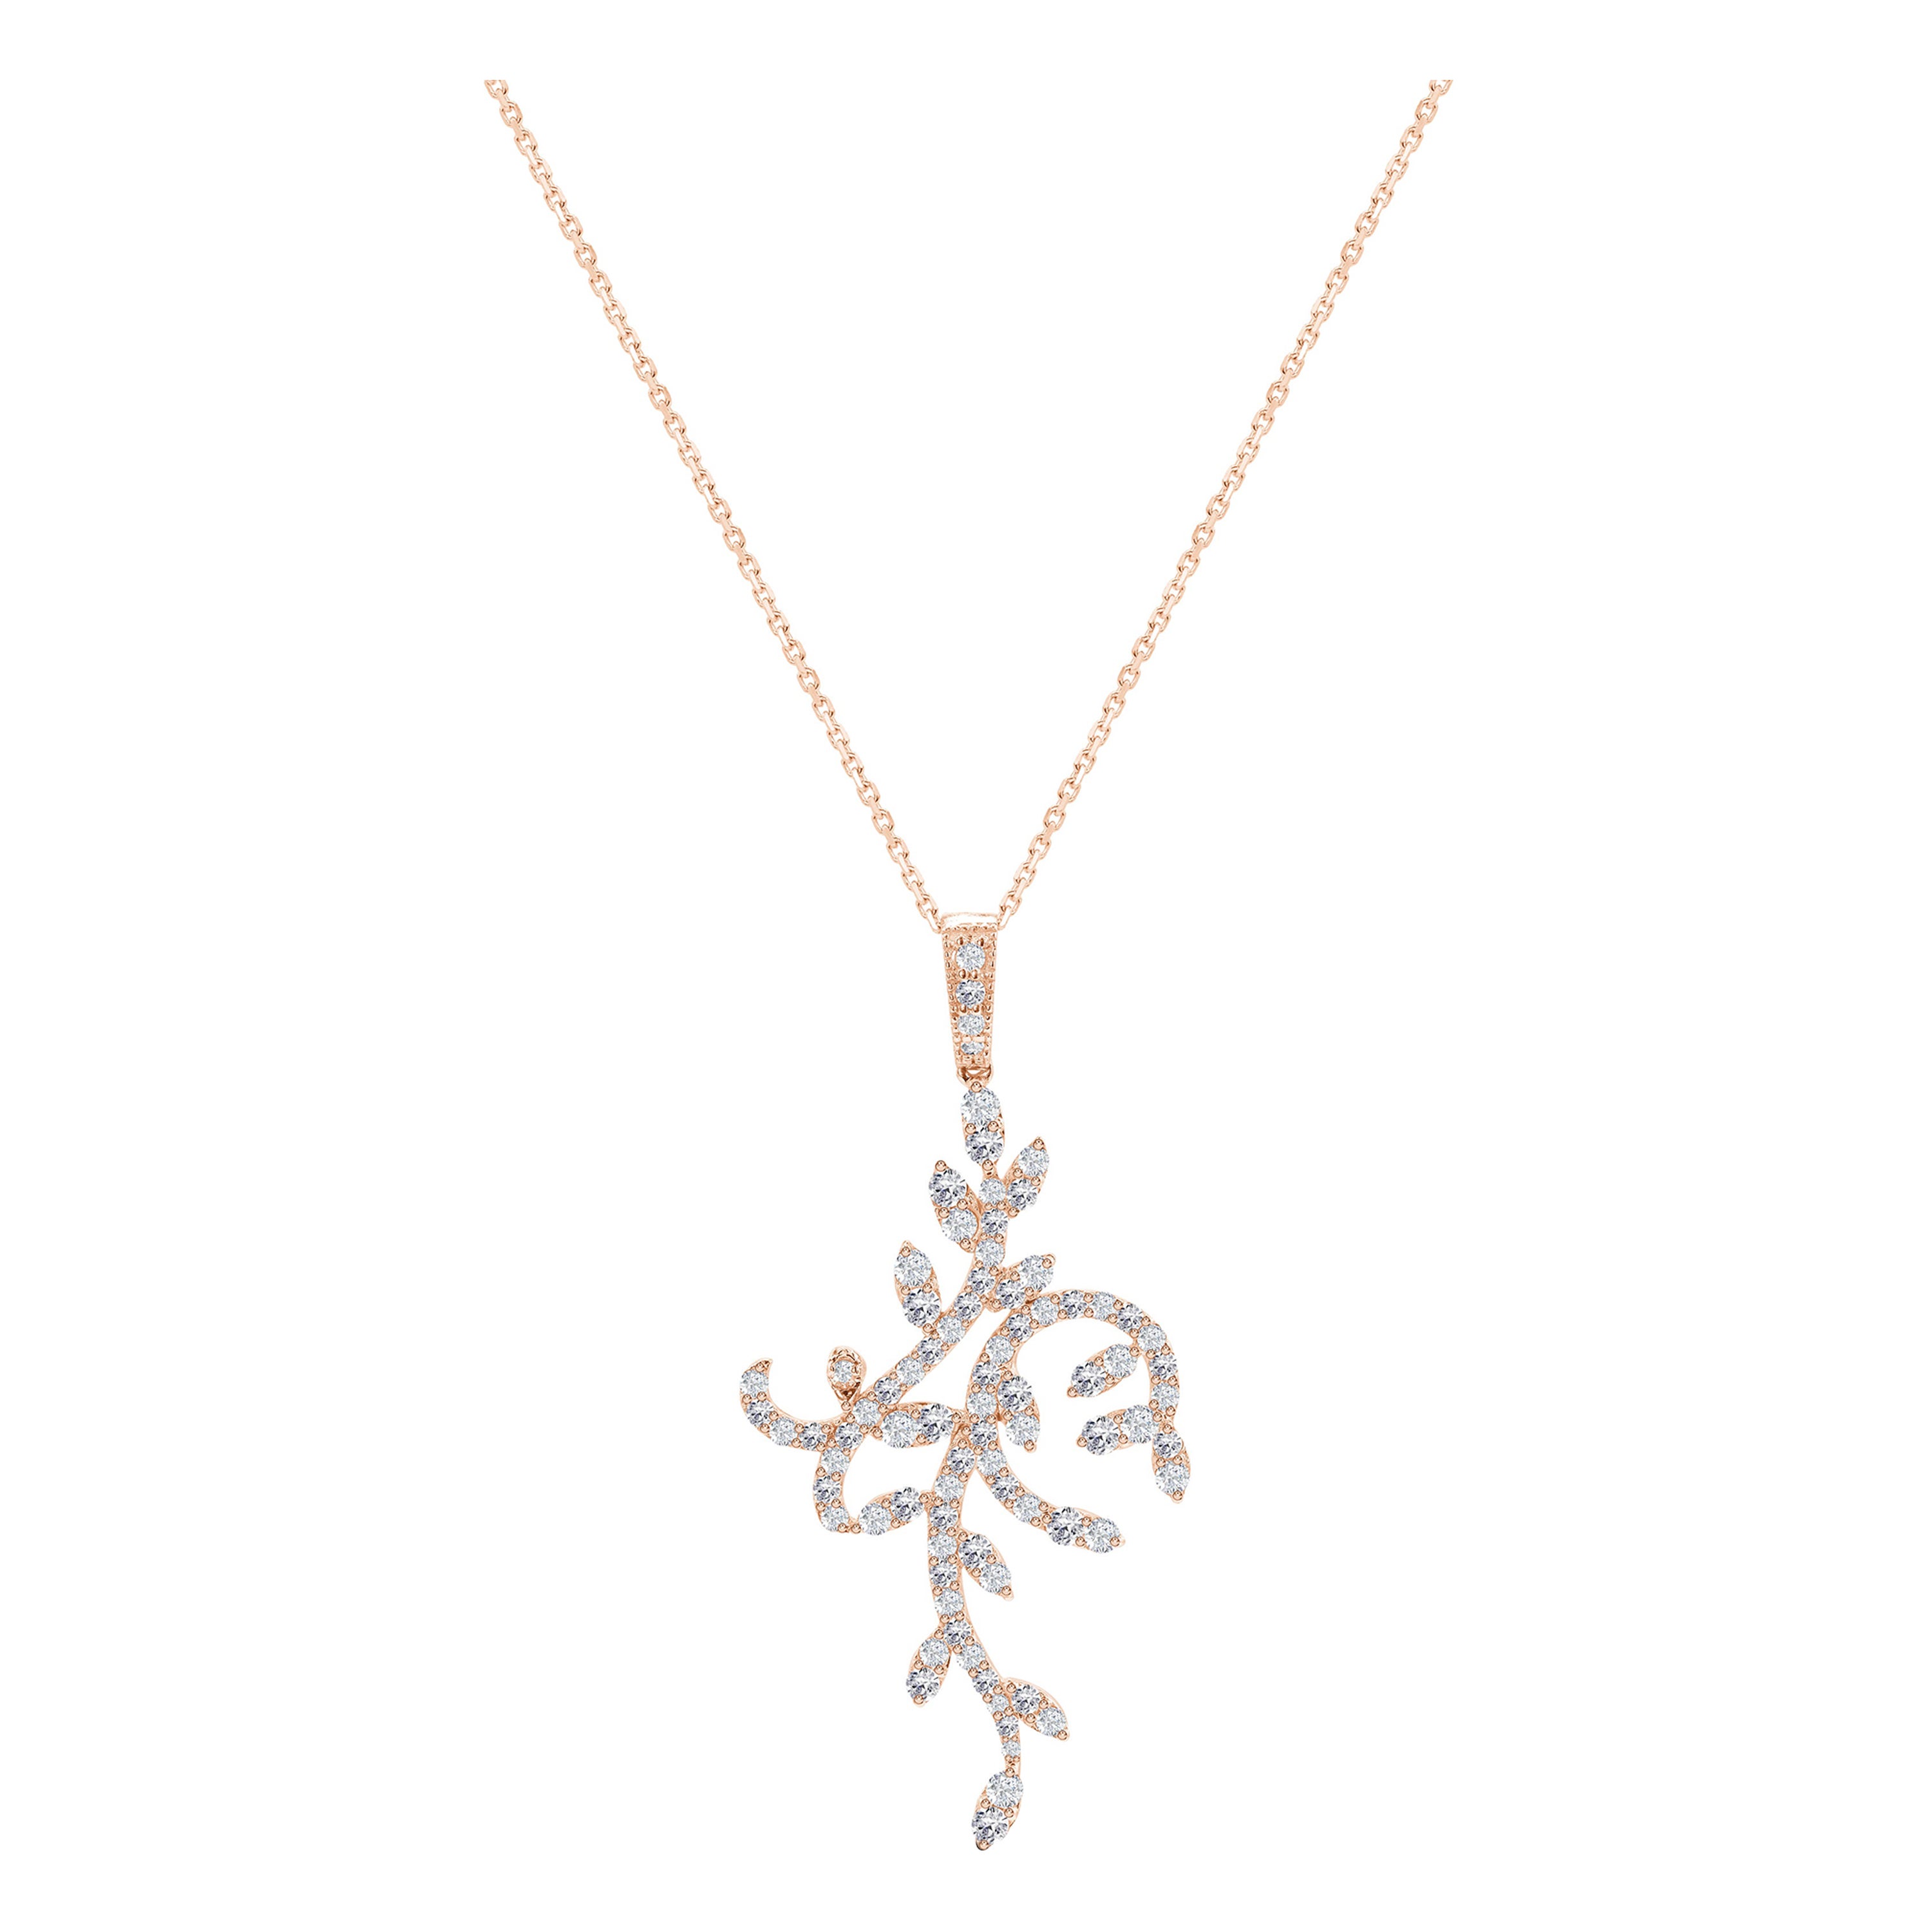 1.35 Ct Diamond Leaf Necklace in 18K Gold